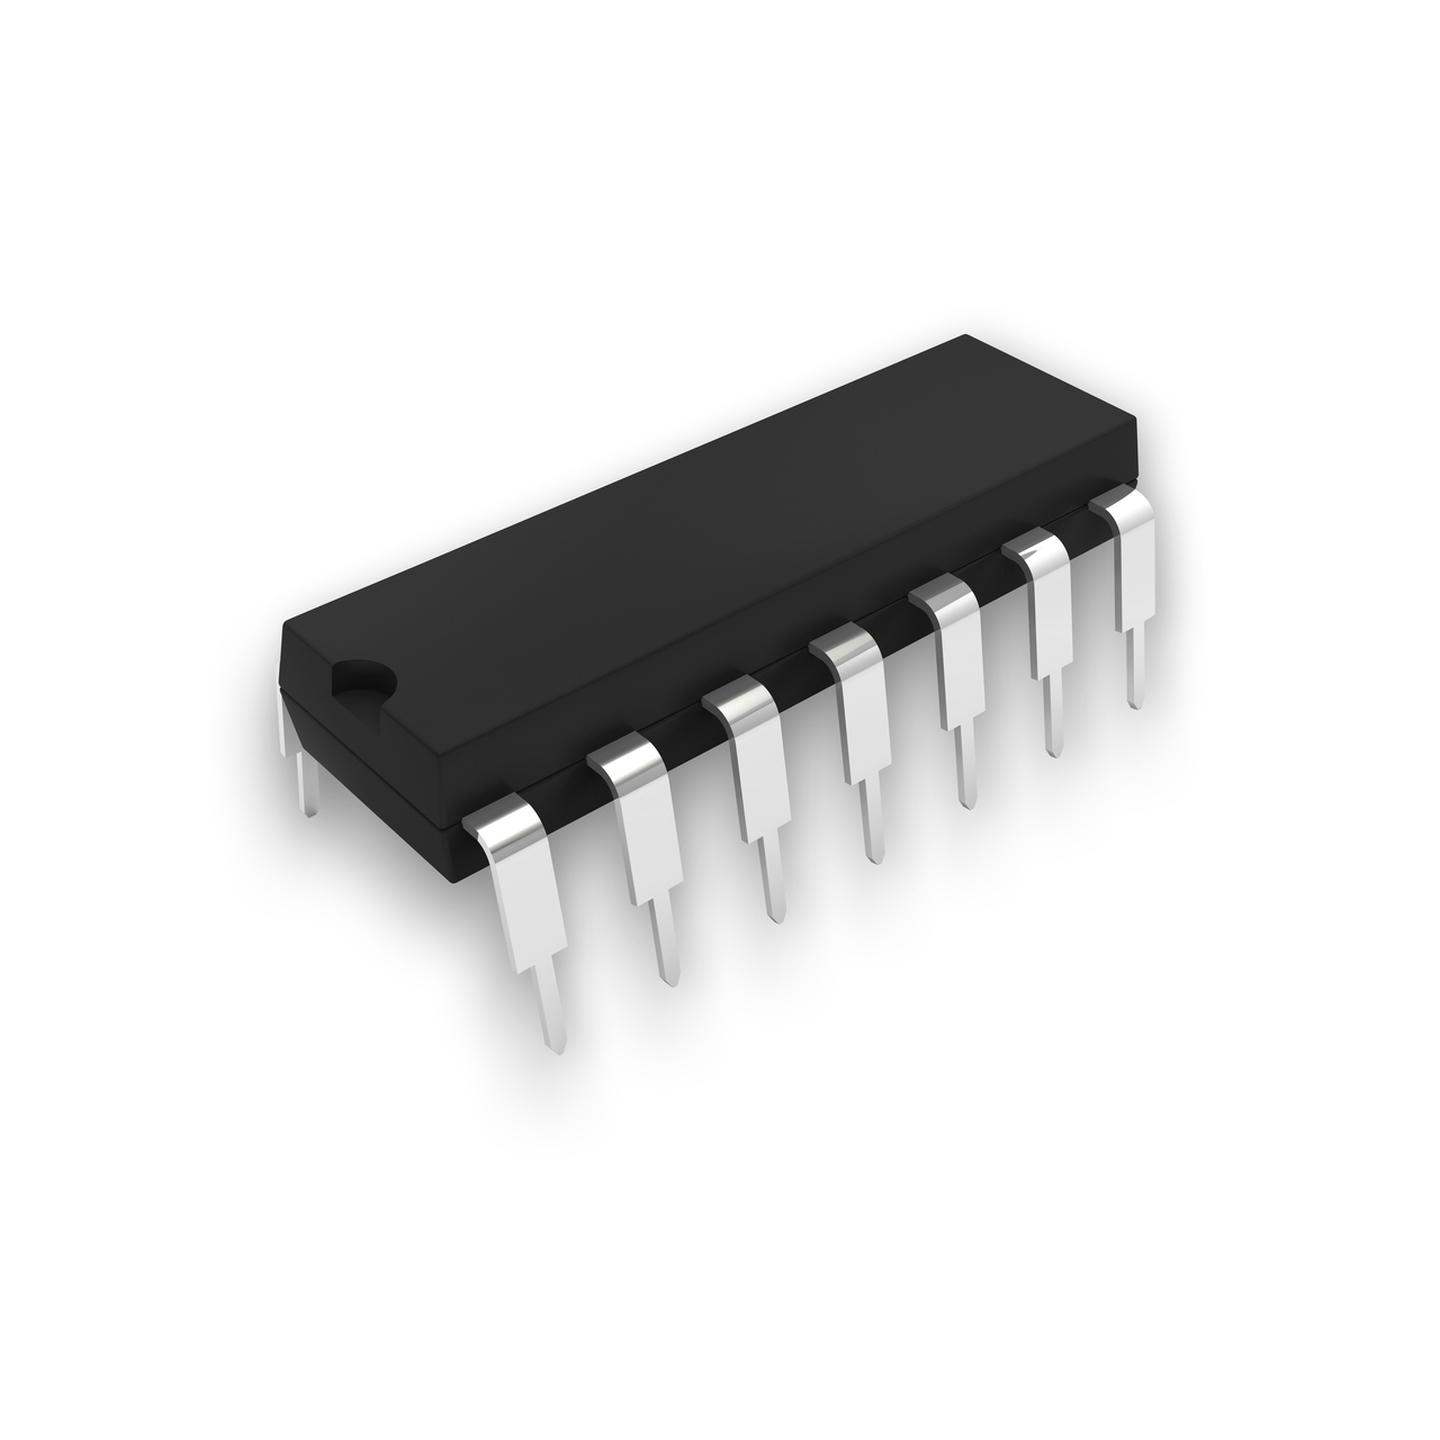 74HC164 8-bit Serial in/out Shift Register IC